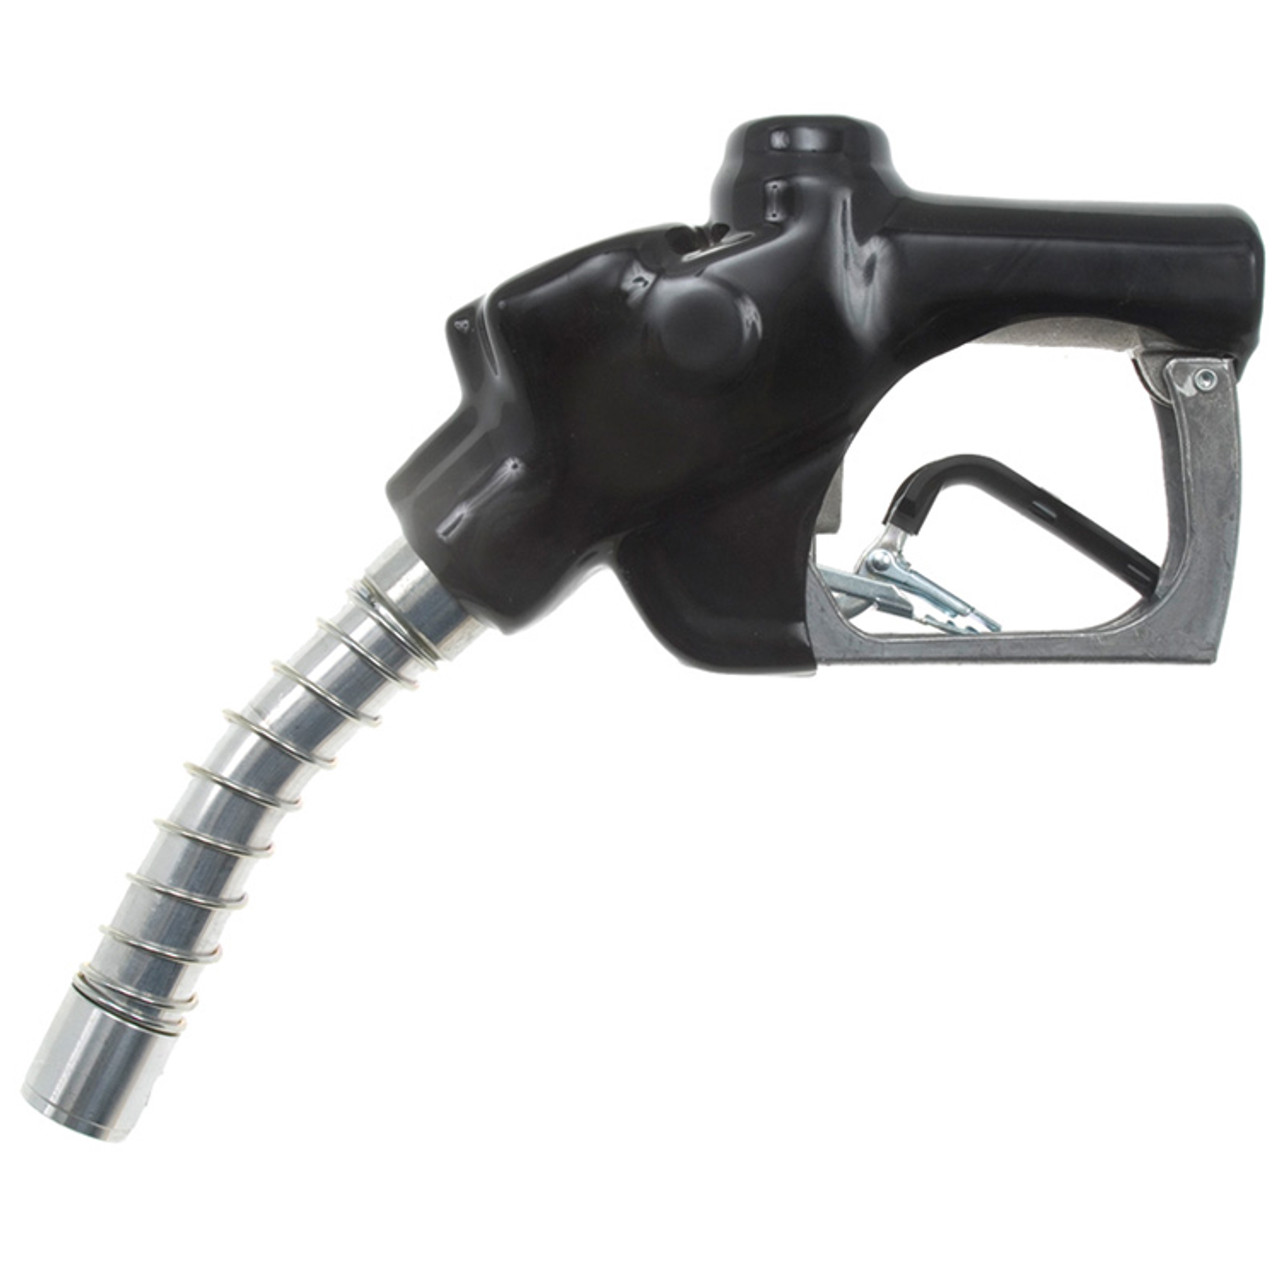 1" Unleaded Fuel Nozzle Pressure Activated w/ Hold Open Clip  G69PA-100-B